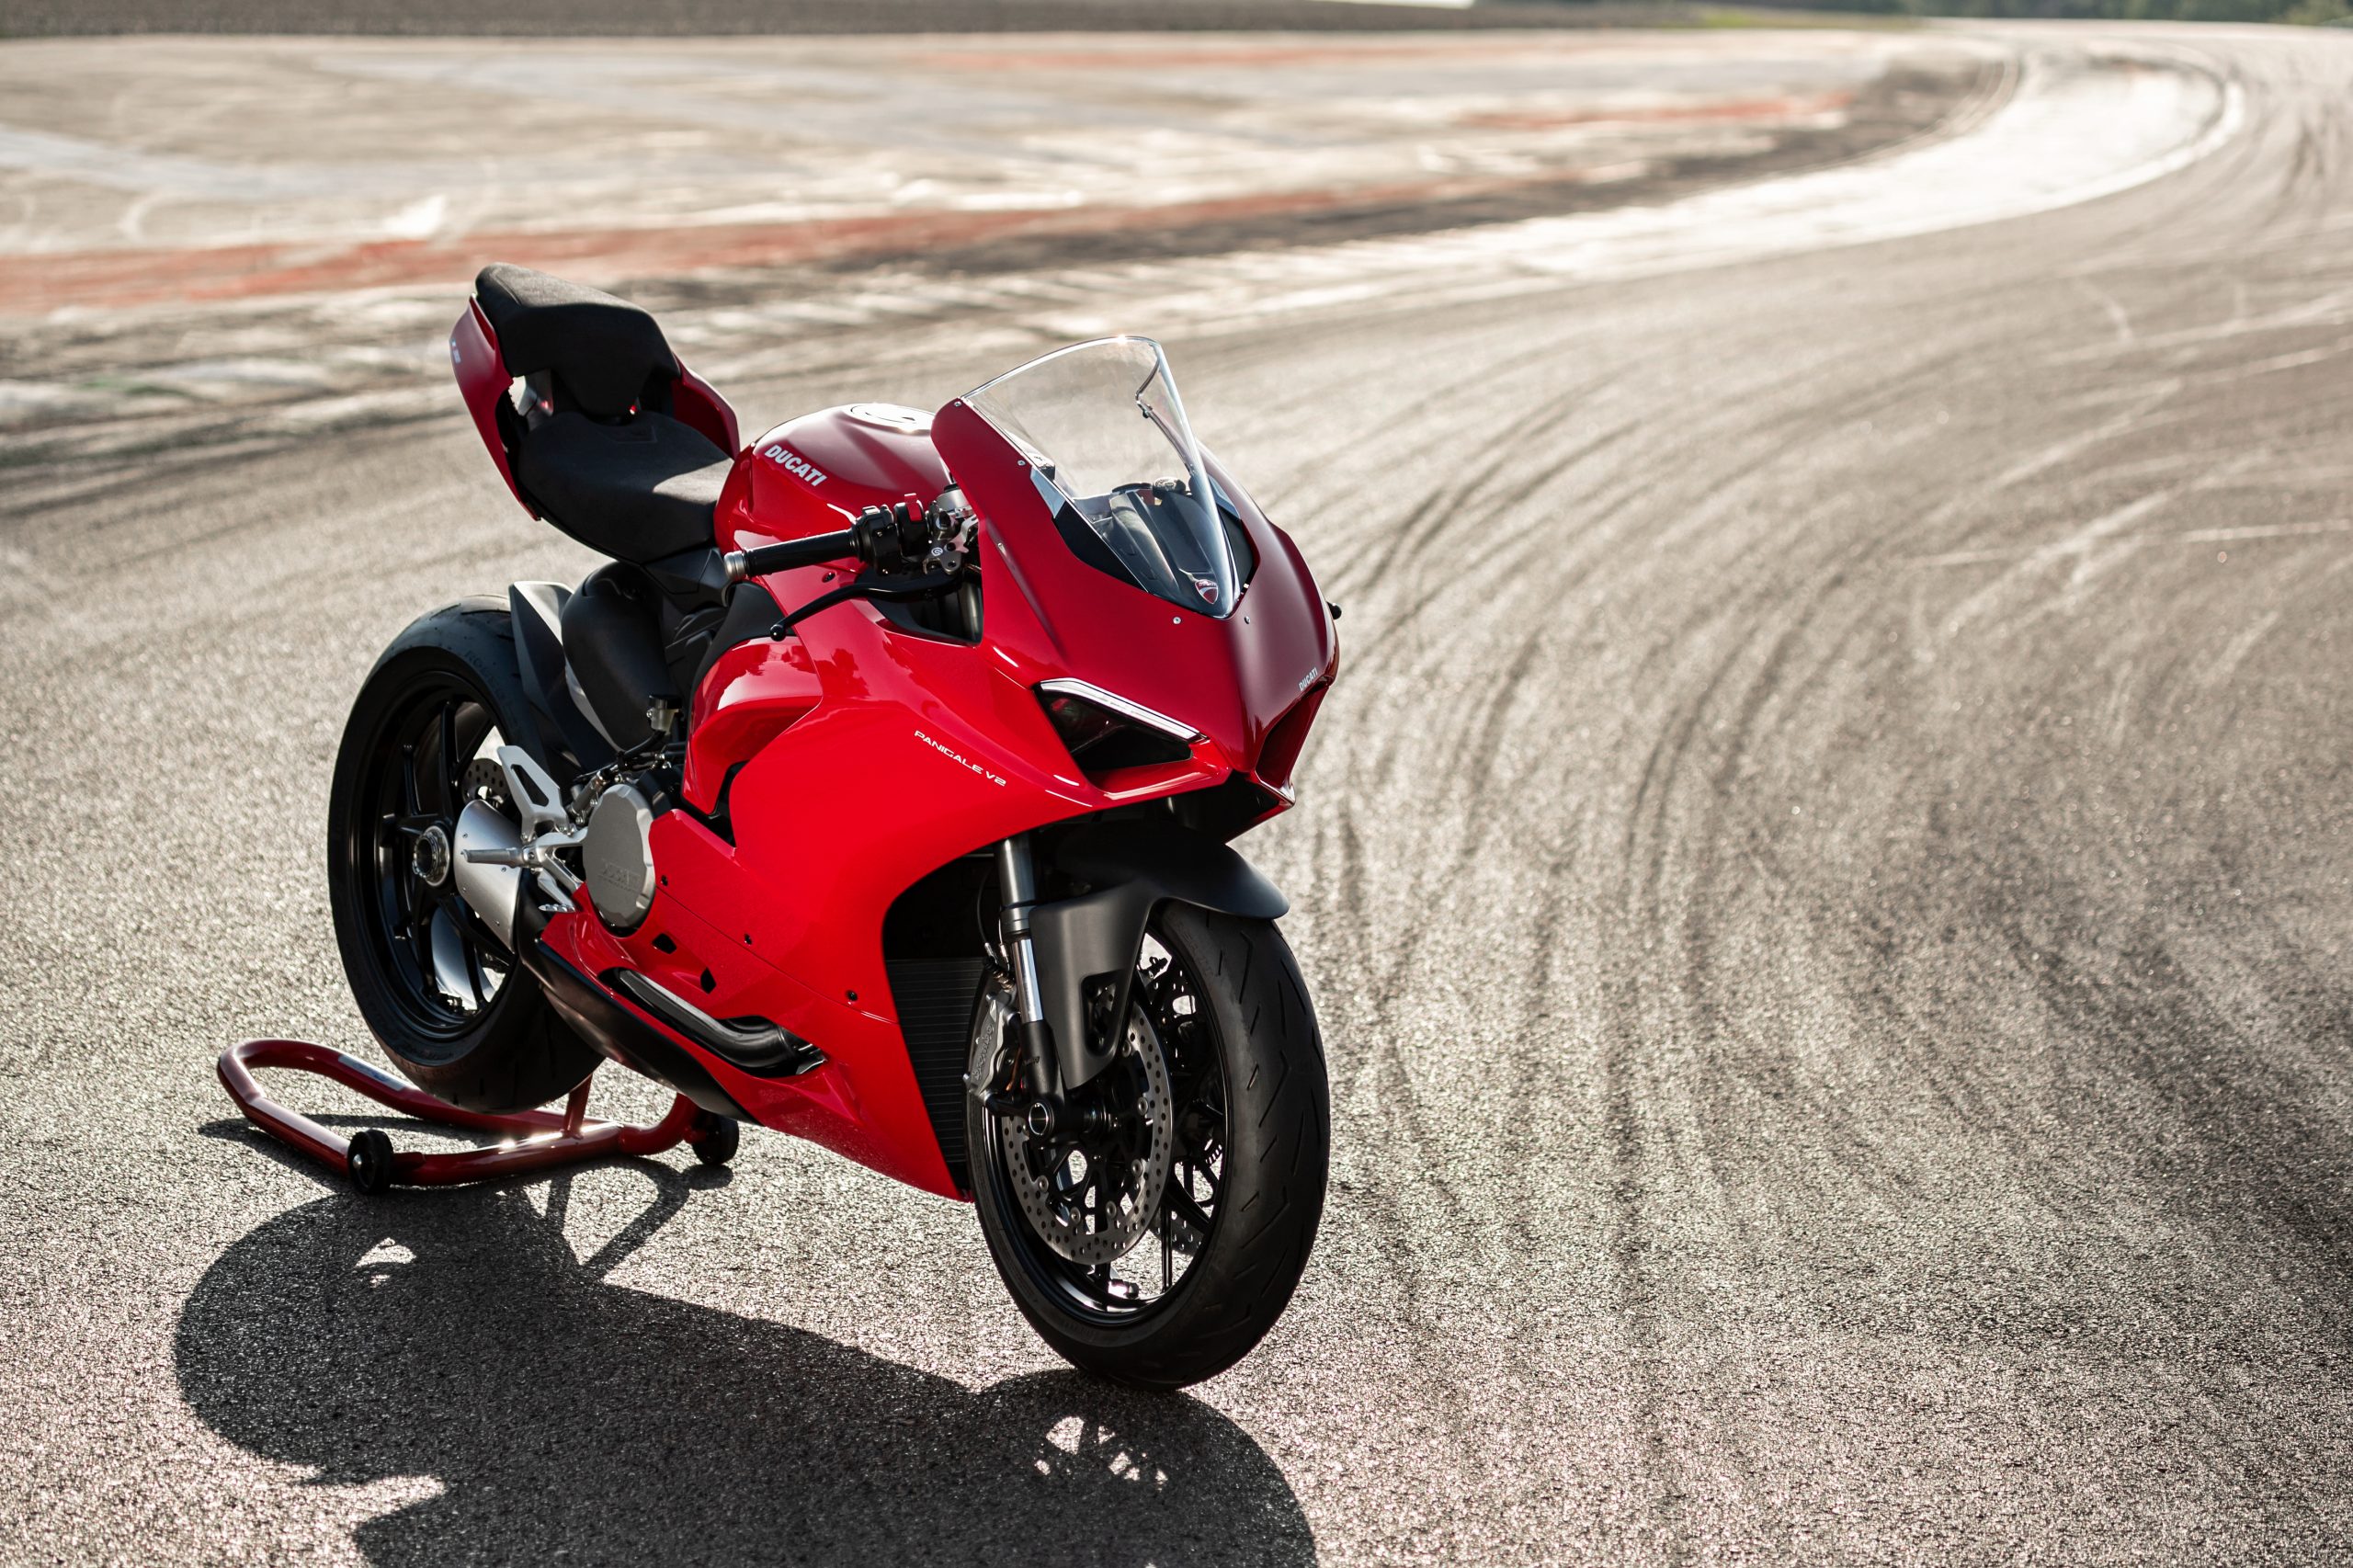 DUCATI_PANIGALE V2_AMBIENCE_28_UC101517_High